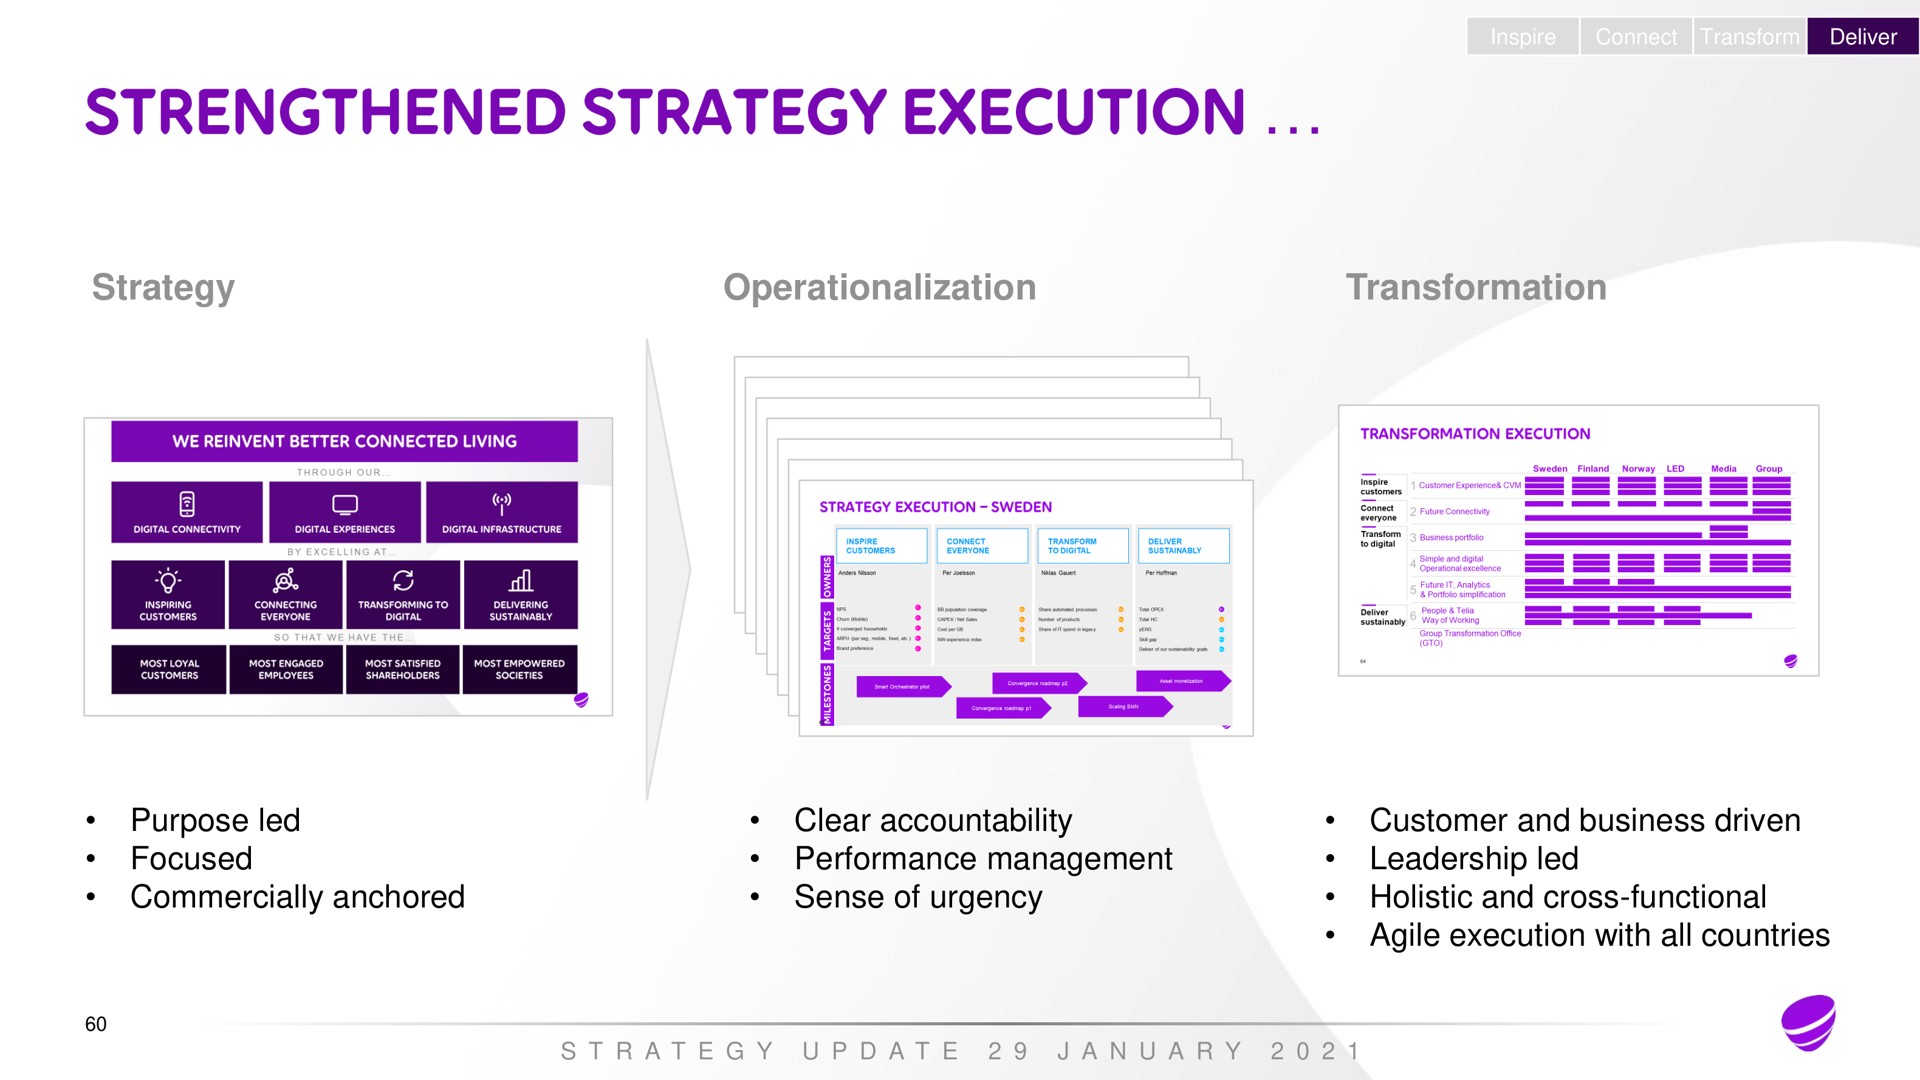 inspire connect transform deliver strategy transformation purpose led focused commercially anchored clear accountability performance management sense of urgency customer and business driven leadership led holistic and cross functional agile execution with all countries a a a a strengthened | Telia Company